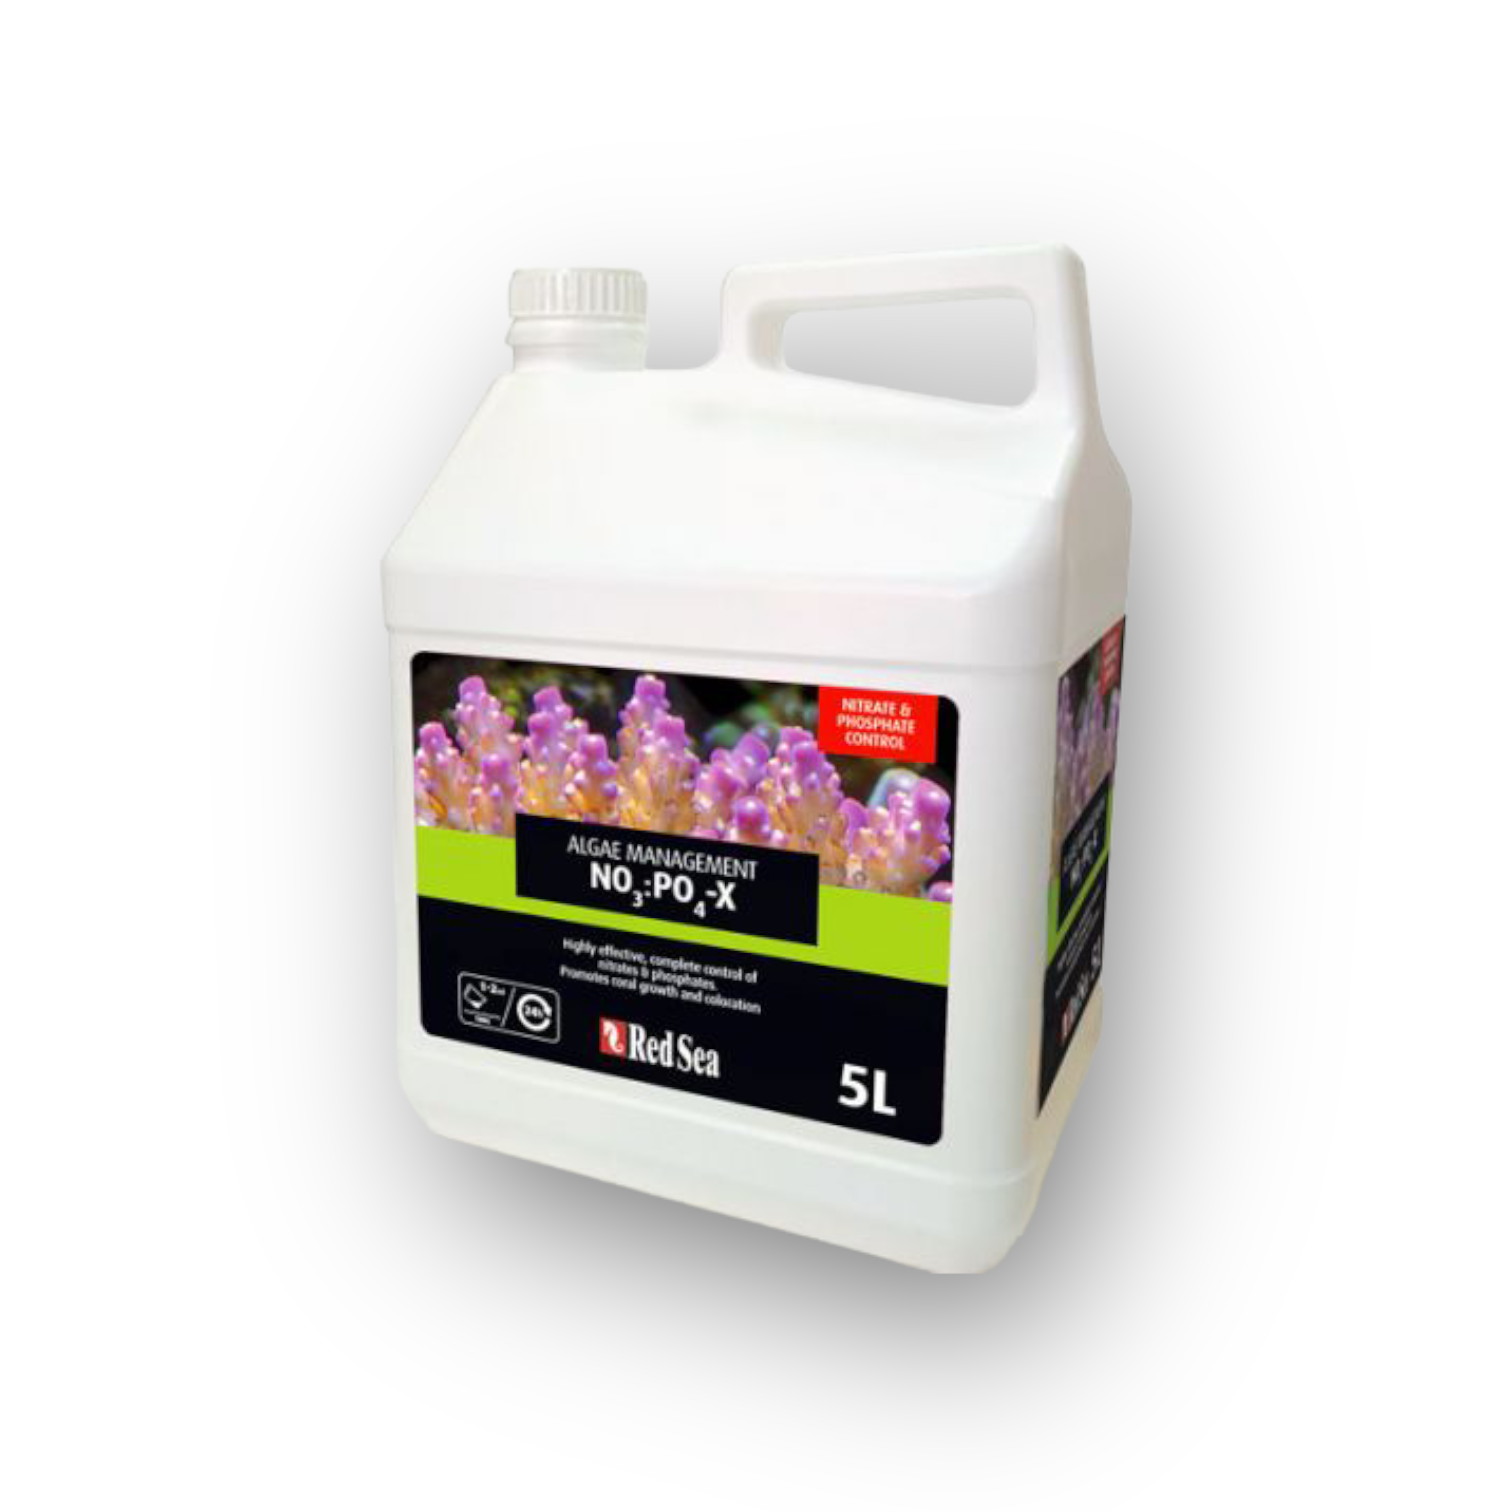 Red Sea Nitrate & Phosphate Reducer NO3:PO4-X 5 Litre